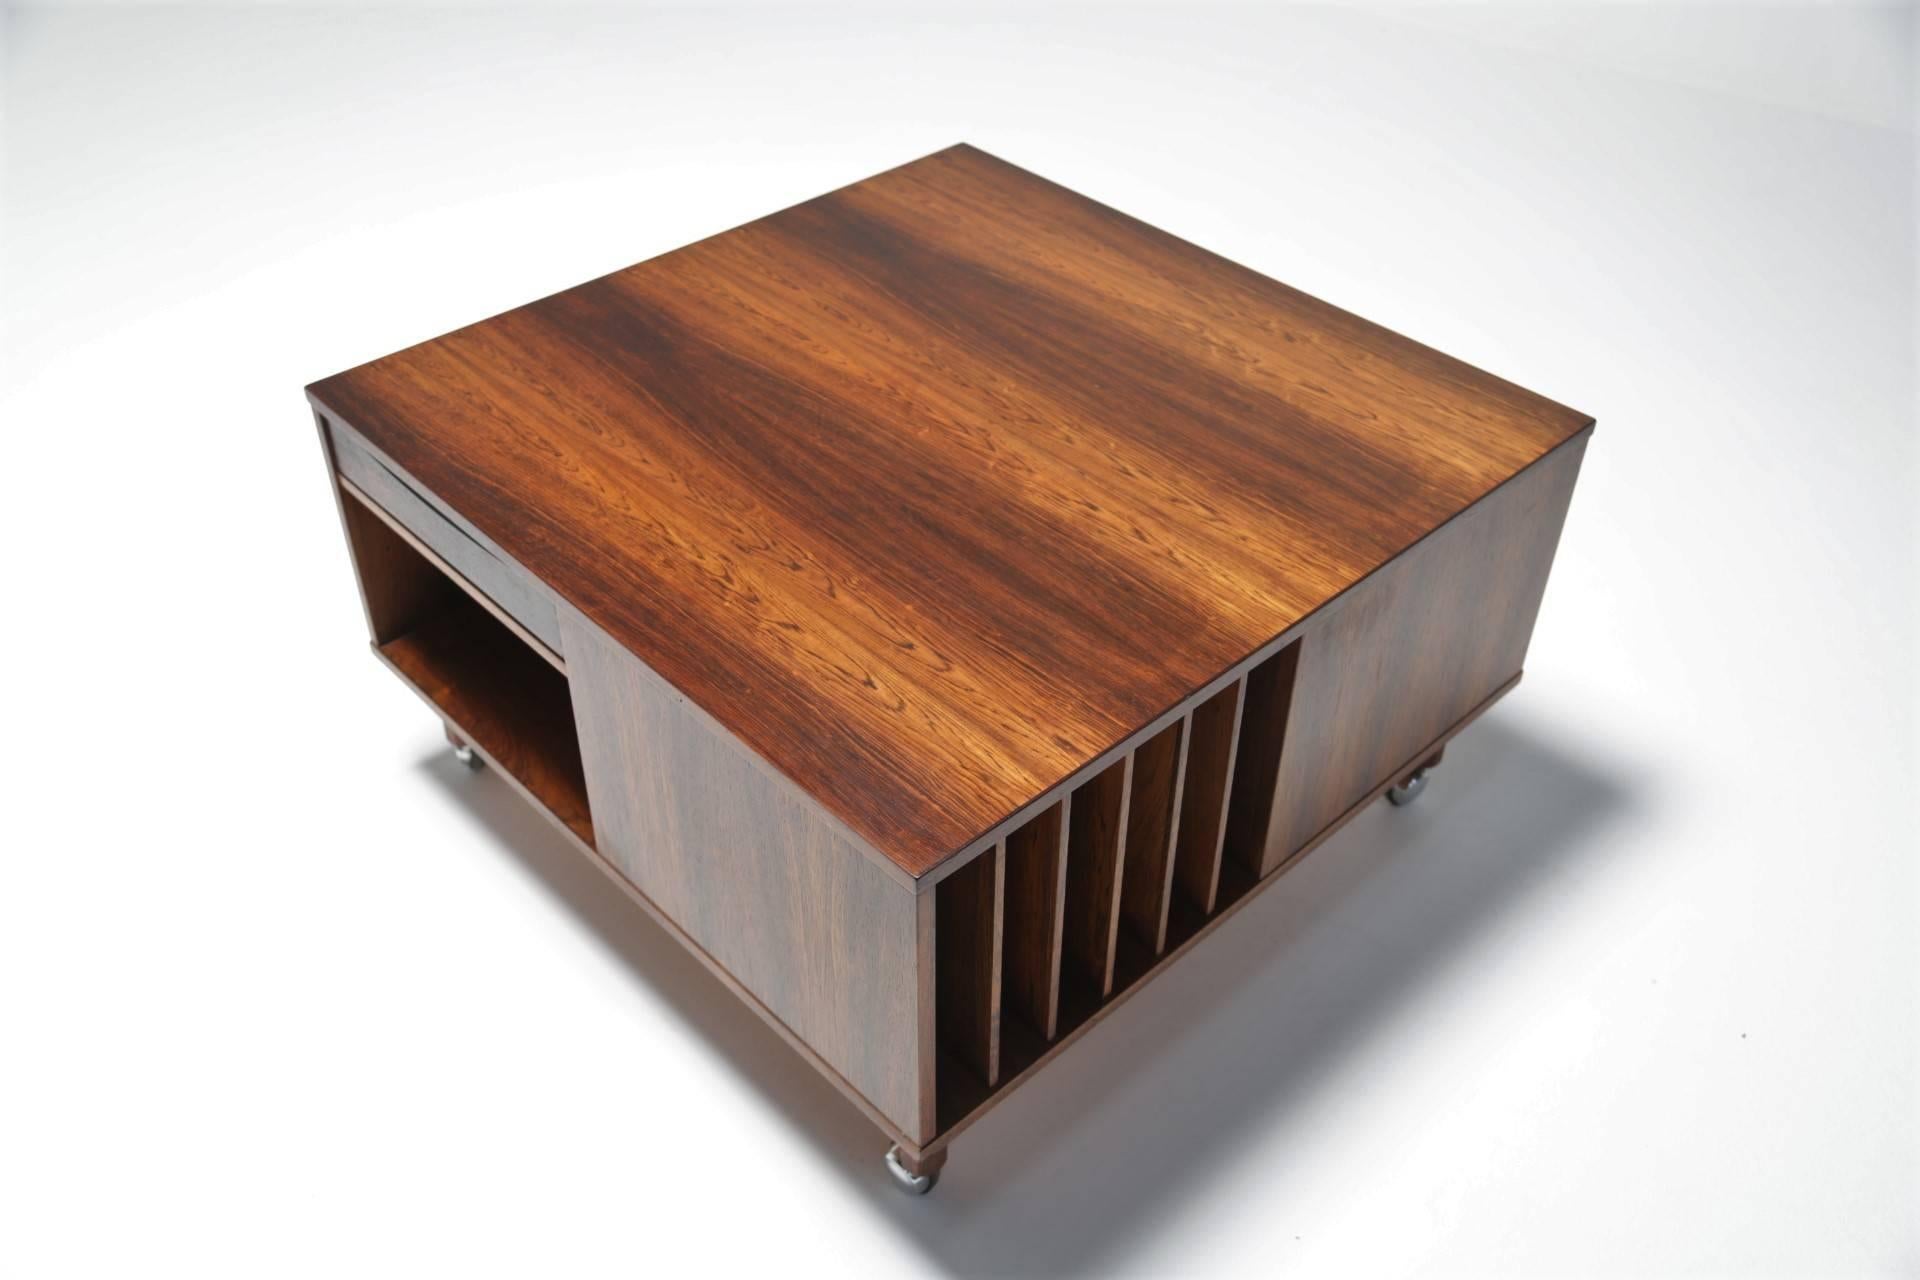 Danish designer Peter Lovig Nielsen created this Mid-Century Modern 'Cubus' coffee table. Made from a beautiful rosewood that has great grain and rich fiery tones of black and red. This is a large square coffee table that could easily double-up as a